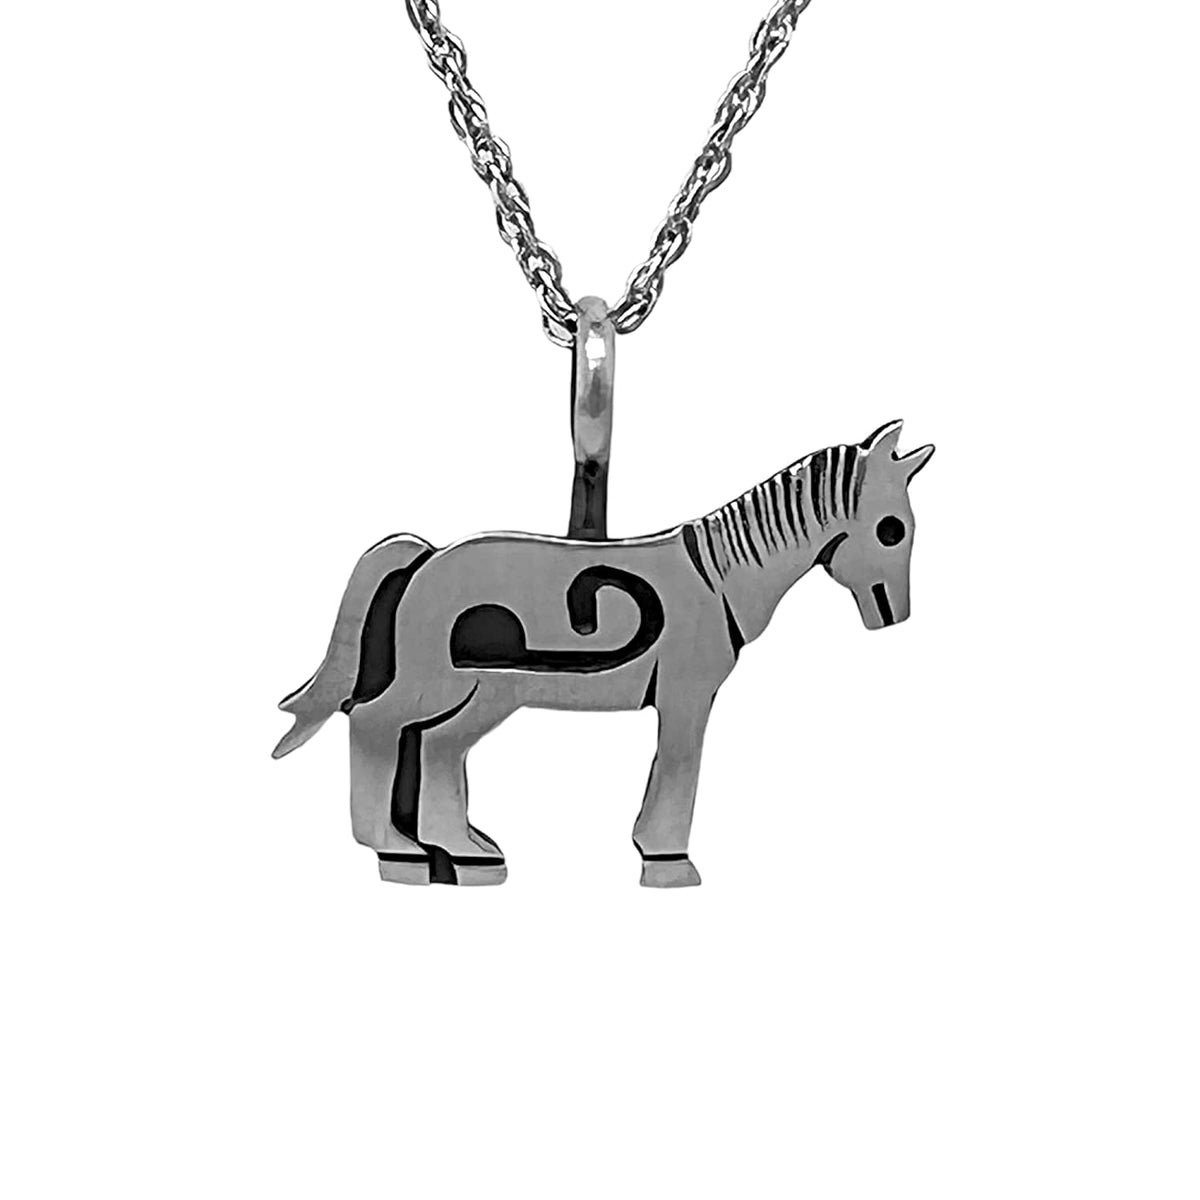 Genuine Sterling Silver Horse Necklace, Pendant and Chain Set, 925 Sterling Silver, Native American USA Handmade, Nickel Free